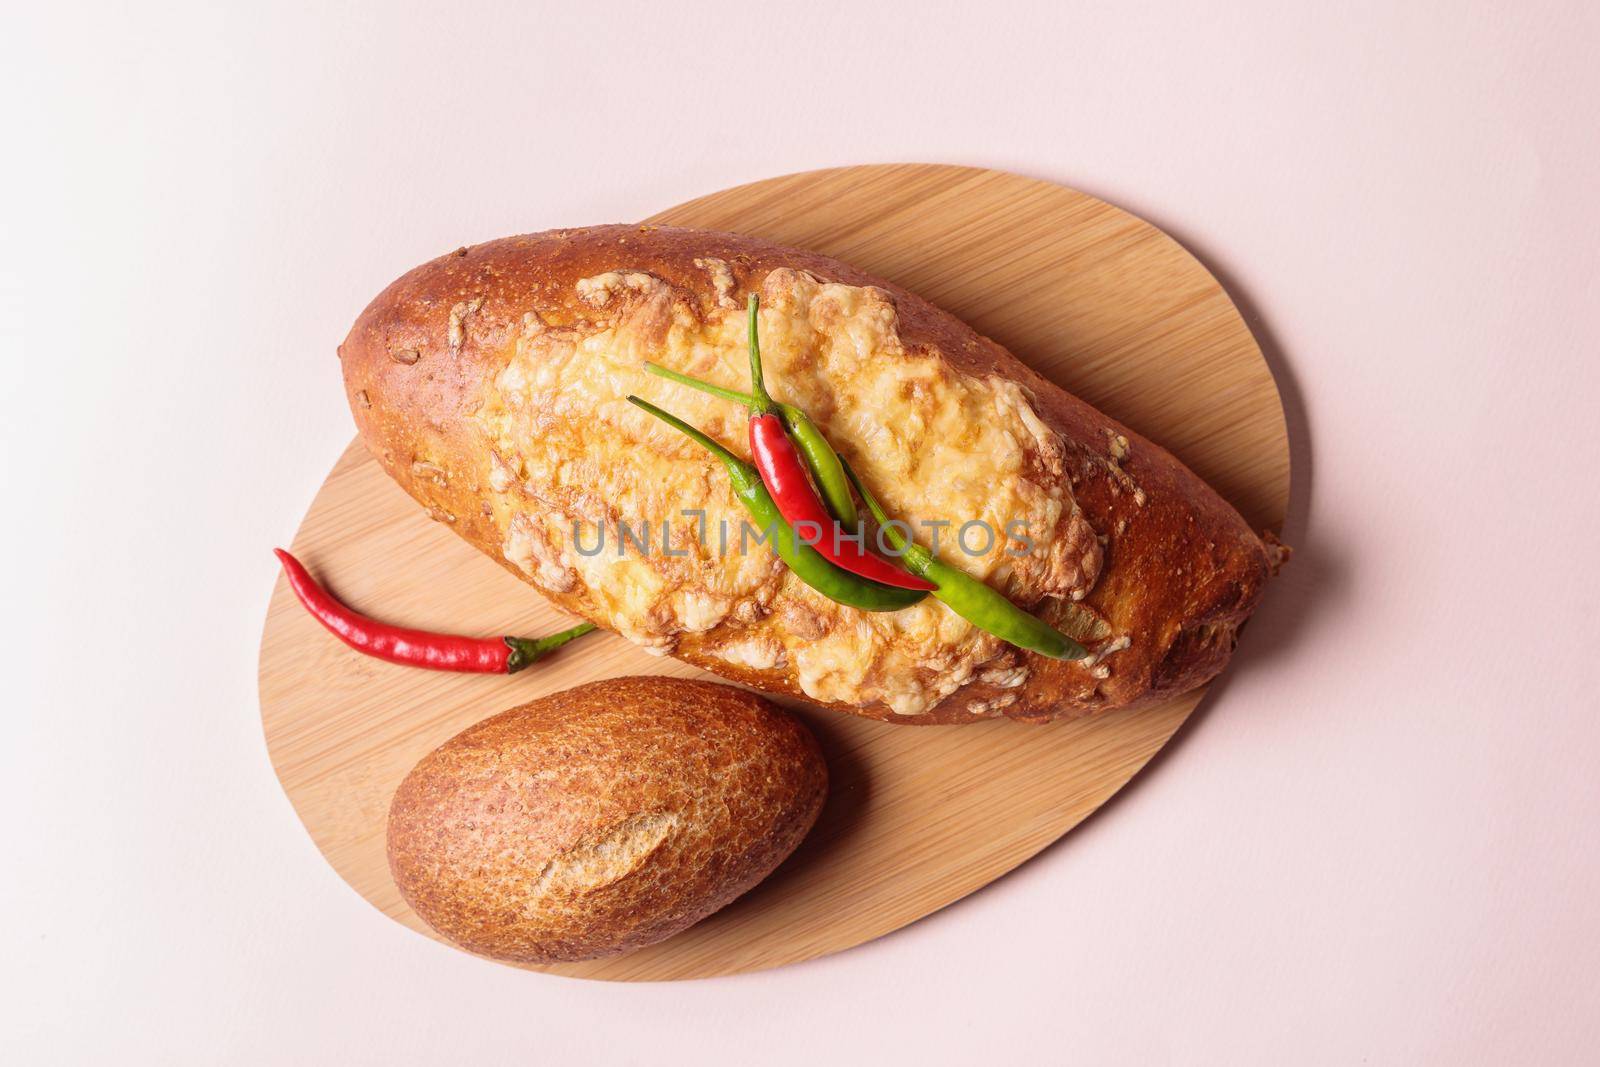 Fresh bread on a cutting board with red and green chili peppers. by Yurich32